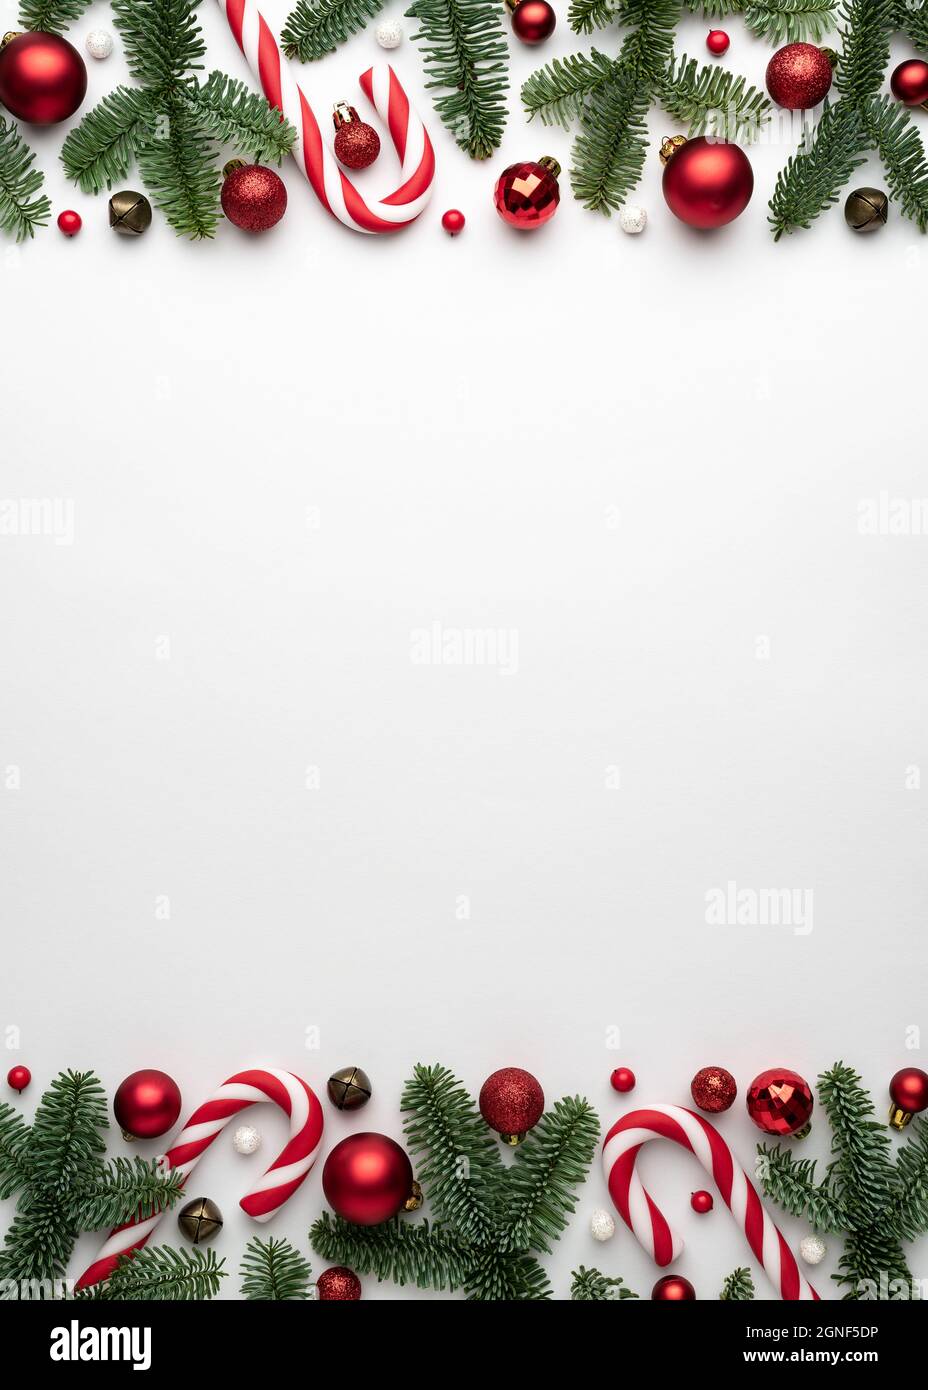 Frame of Christmas tree ornaments on a white background. Festive design with place for text Stock Photo